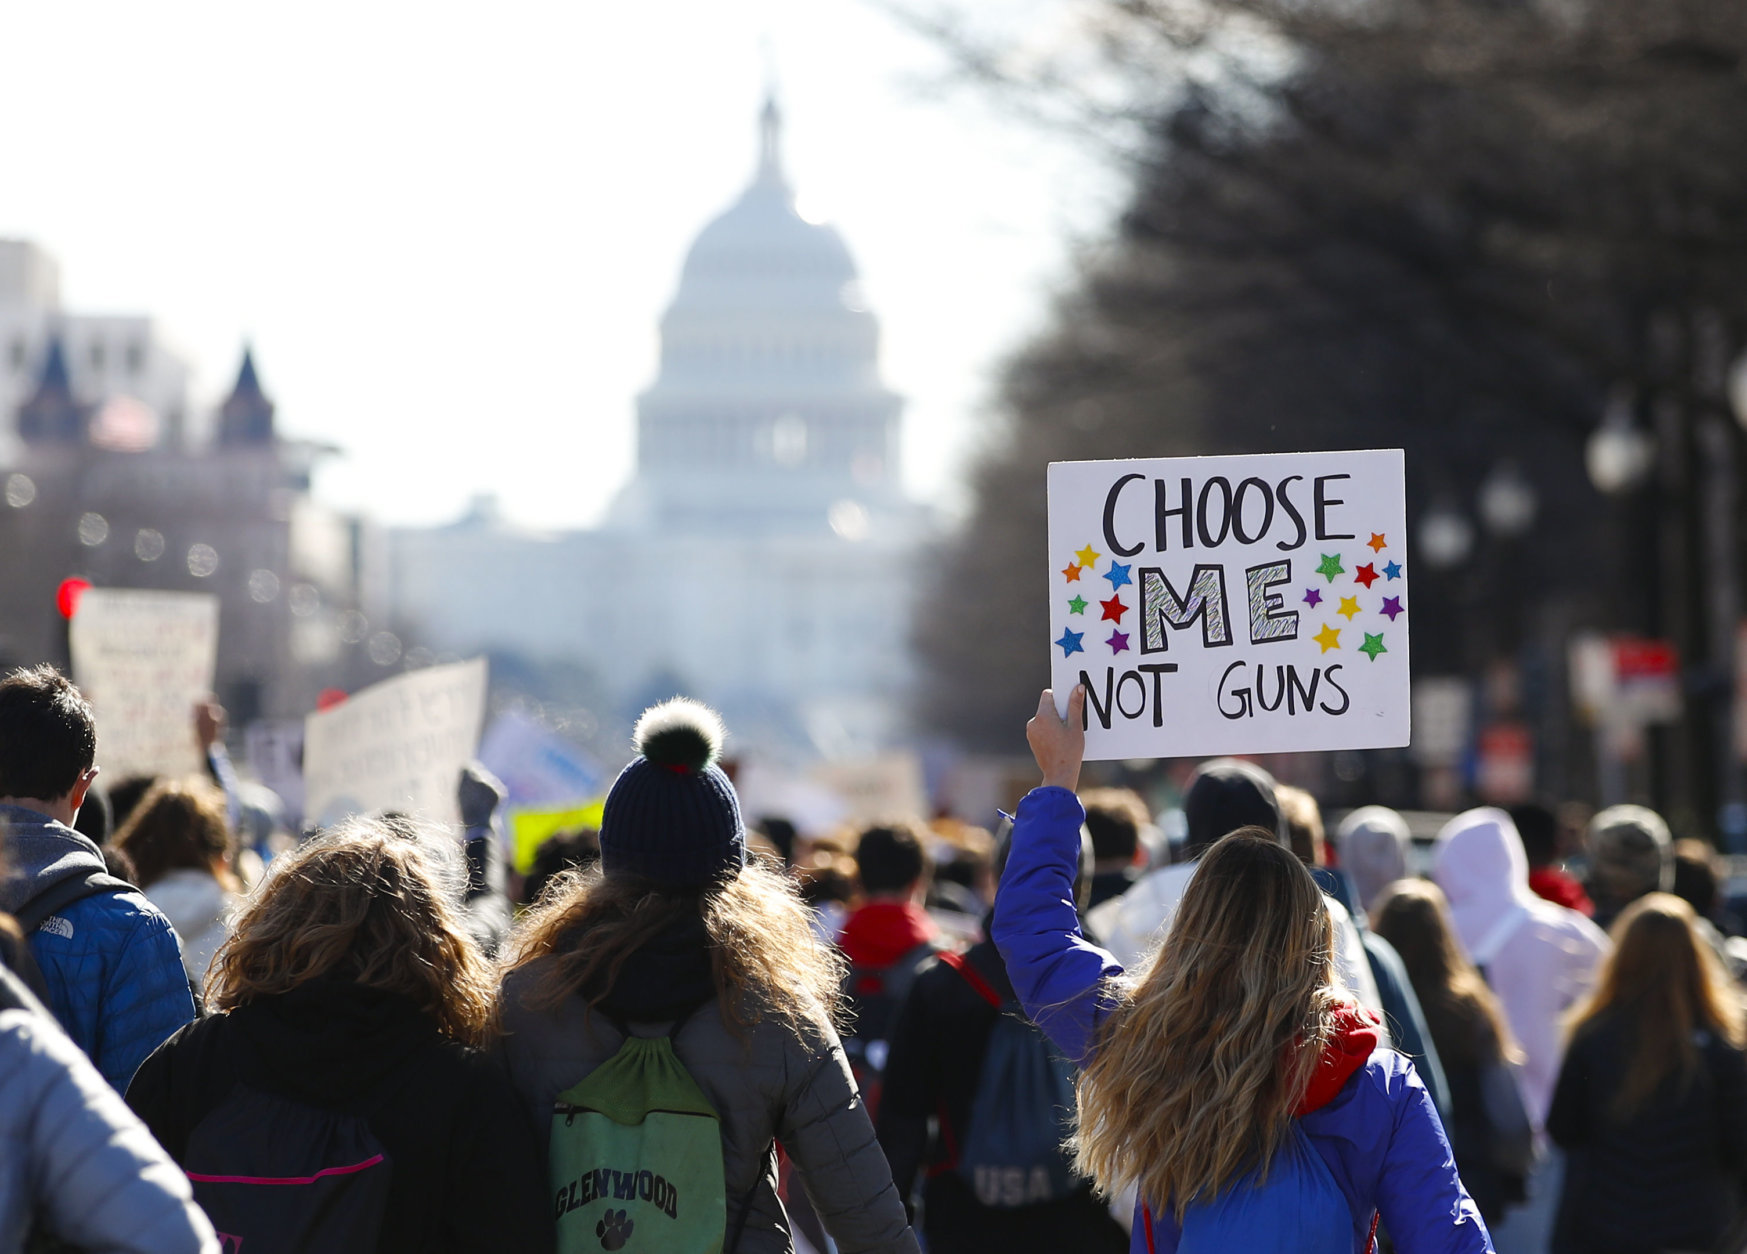 After a rally in front of the White House, students march up Pennsylvania Avenue toward Capitol Hill in Washington, Wednesday, March 14, 2018. Students walked out of school to protest gun violence in the biggest demonstration yet of the student activism that has emerged in response to last month's massacre of 17 people at Florida's Marjory Stoneman Douglas High School. (AP Photo/Carolyn Kaster)